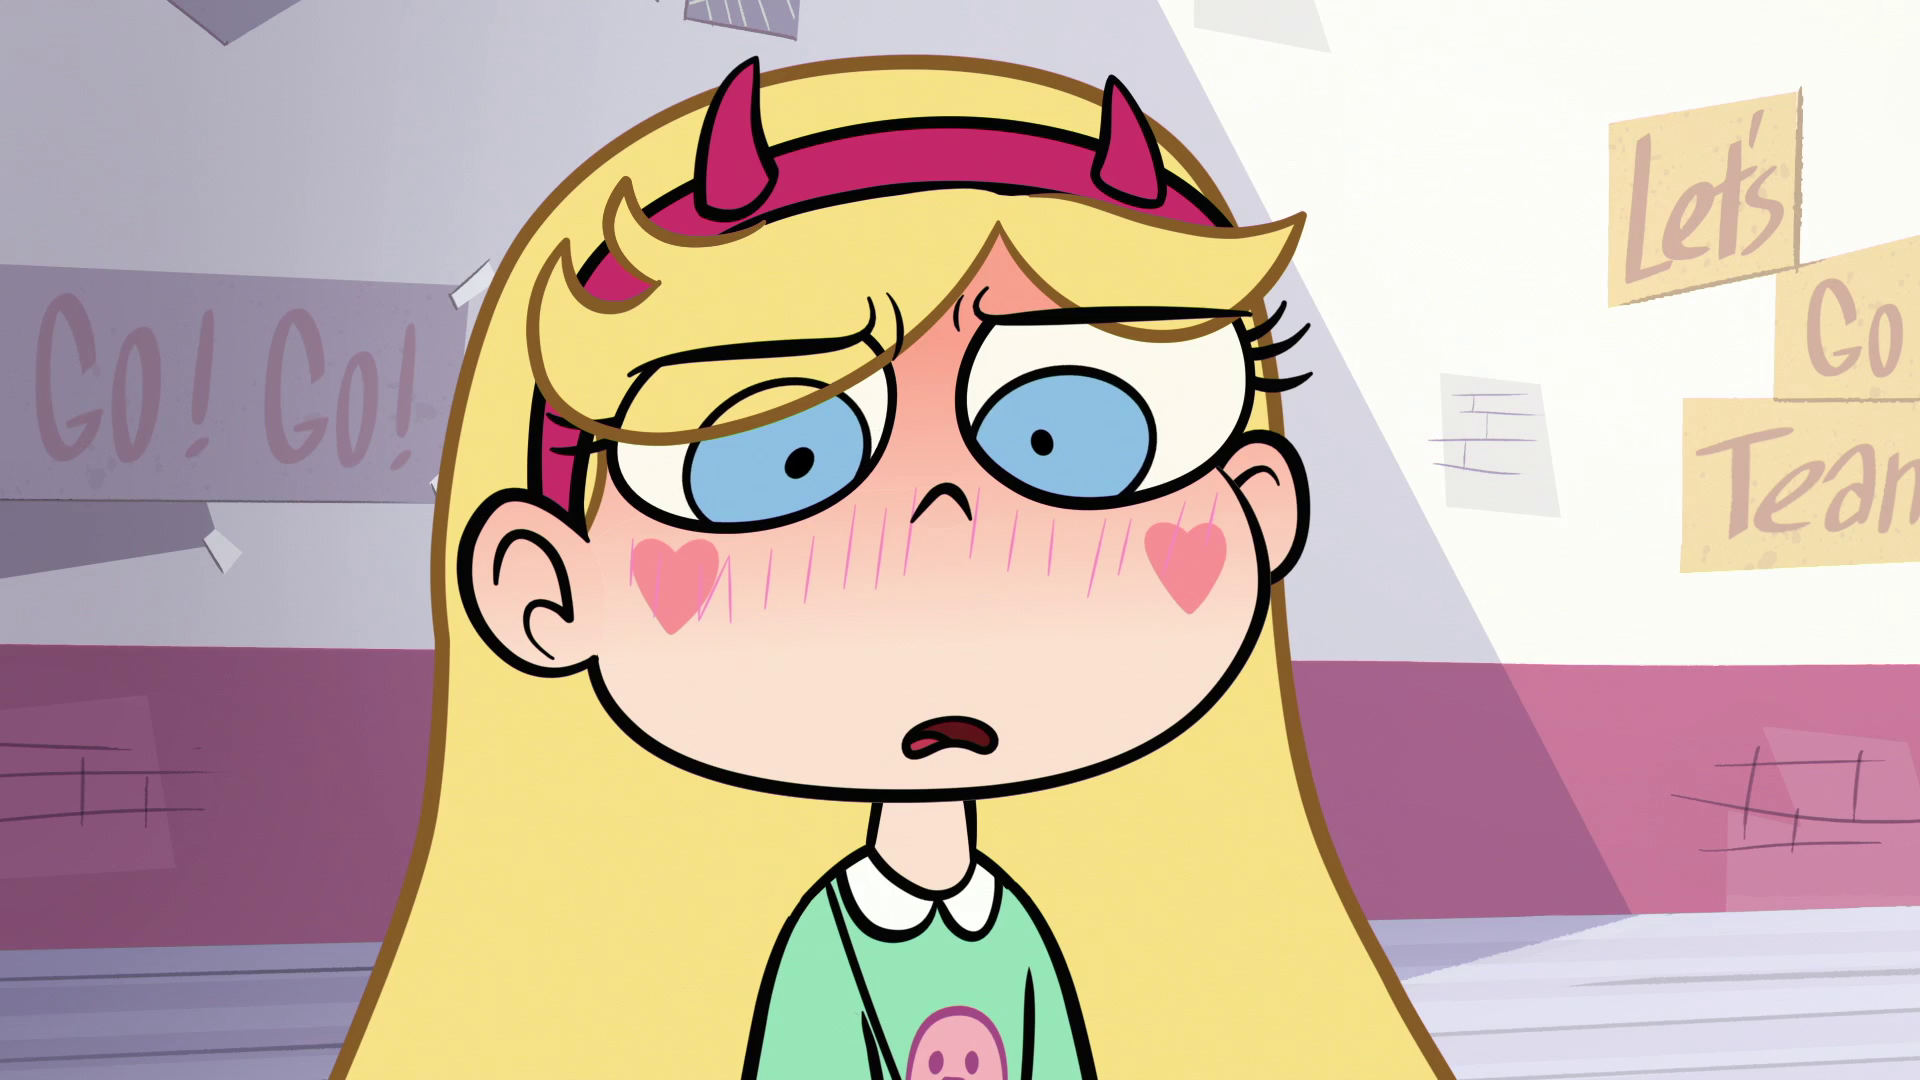 http://vignette3.wikia.nocookie.net/star-and-the-forces-of-evil/images/d/d7/S1E4_Star_Butterfly_blushing_uncomfortably.png/revision/latest?cb=20150408224909